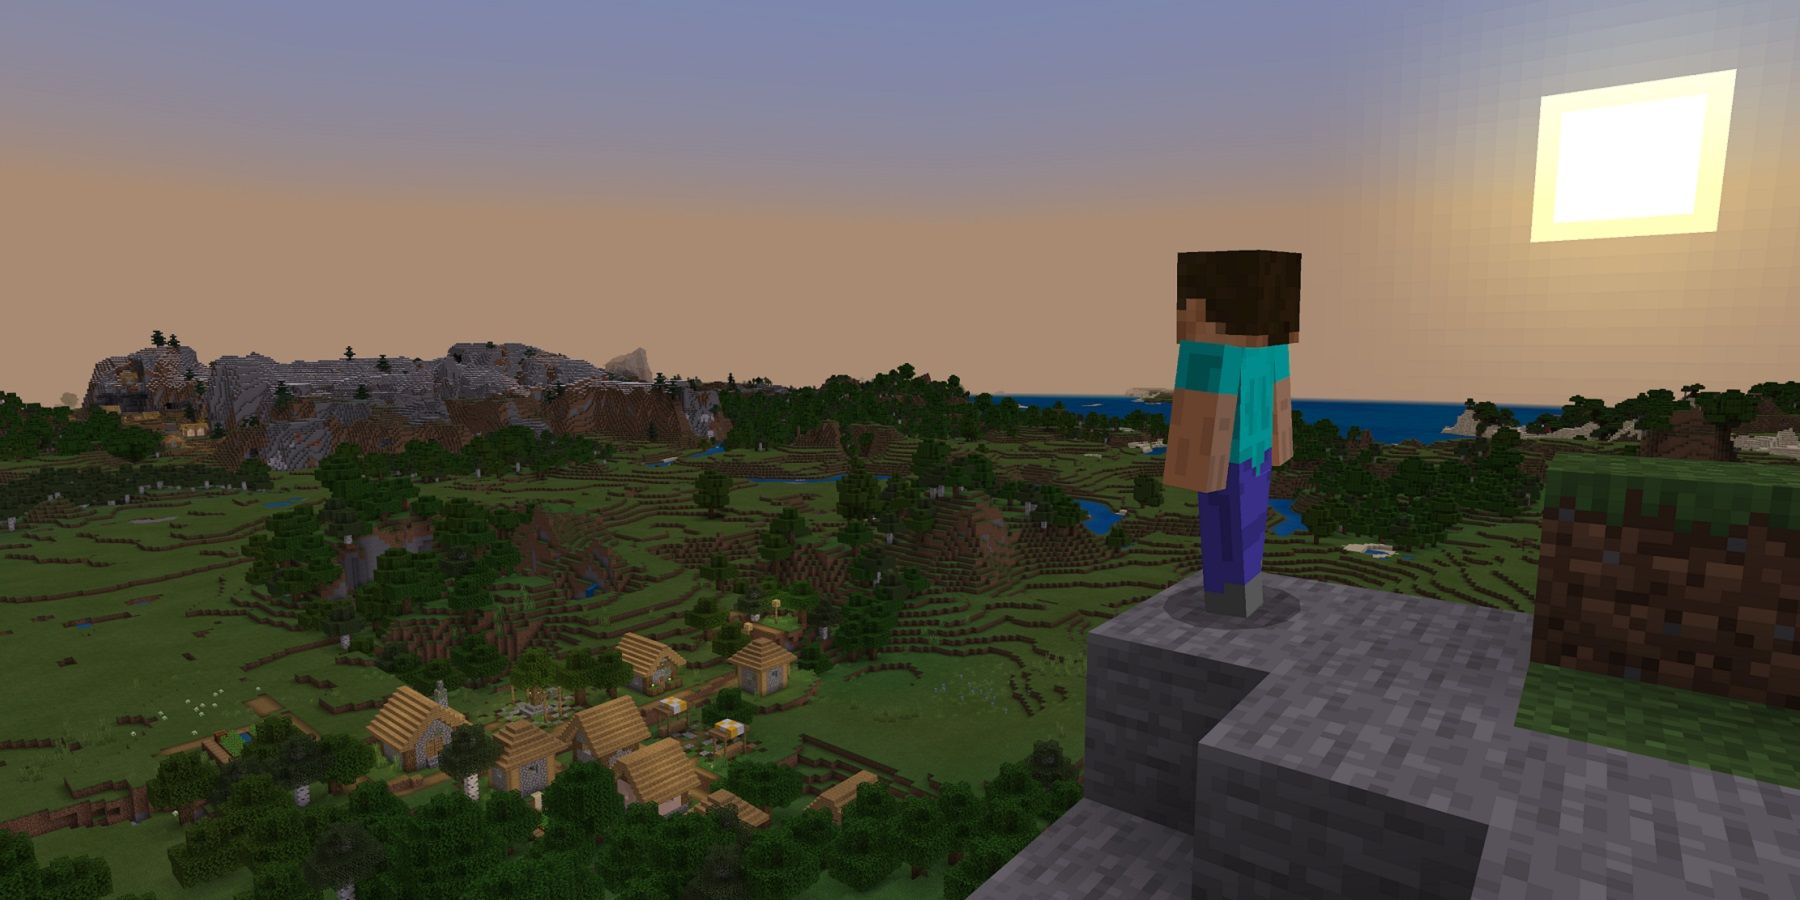 Screenshot from Minecraft showing Minecraft Steve on top of a hill looking out into the distance as the sun sets.